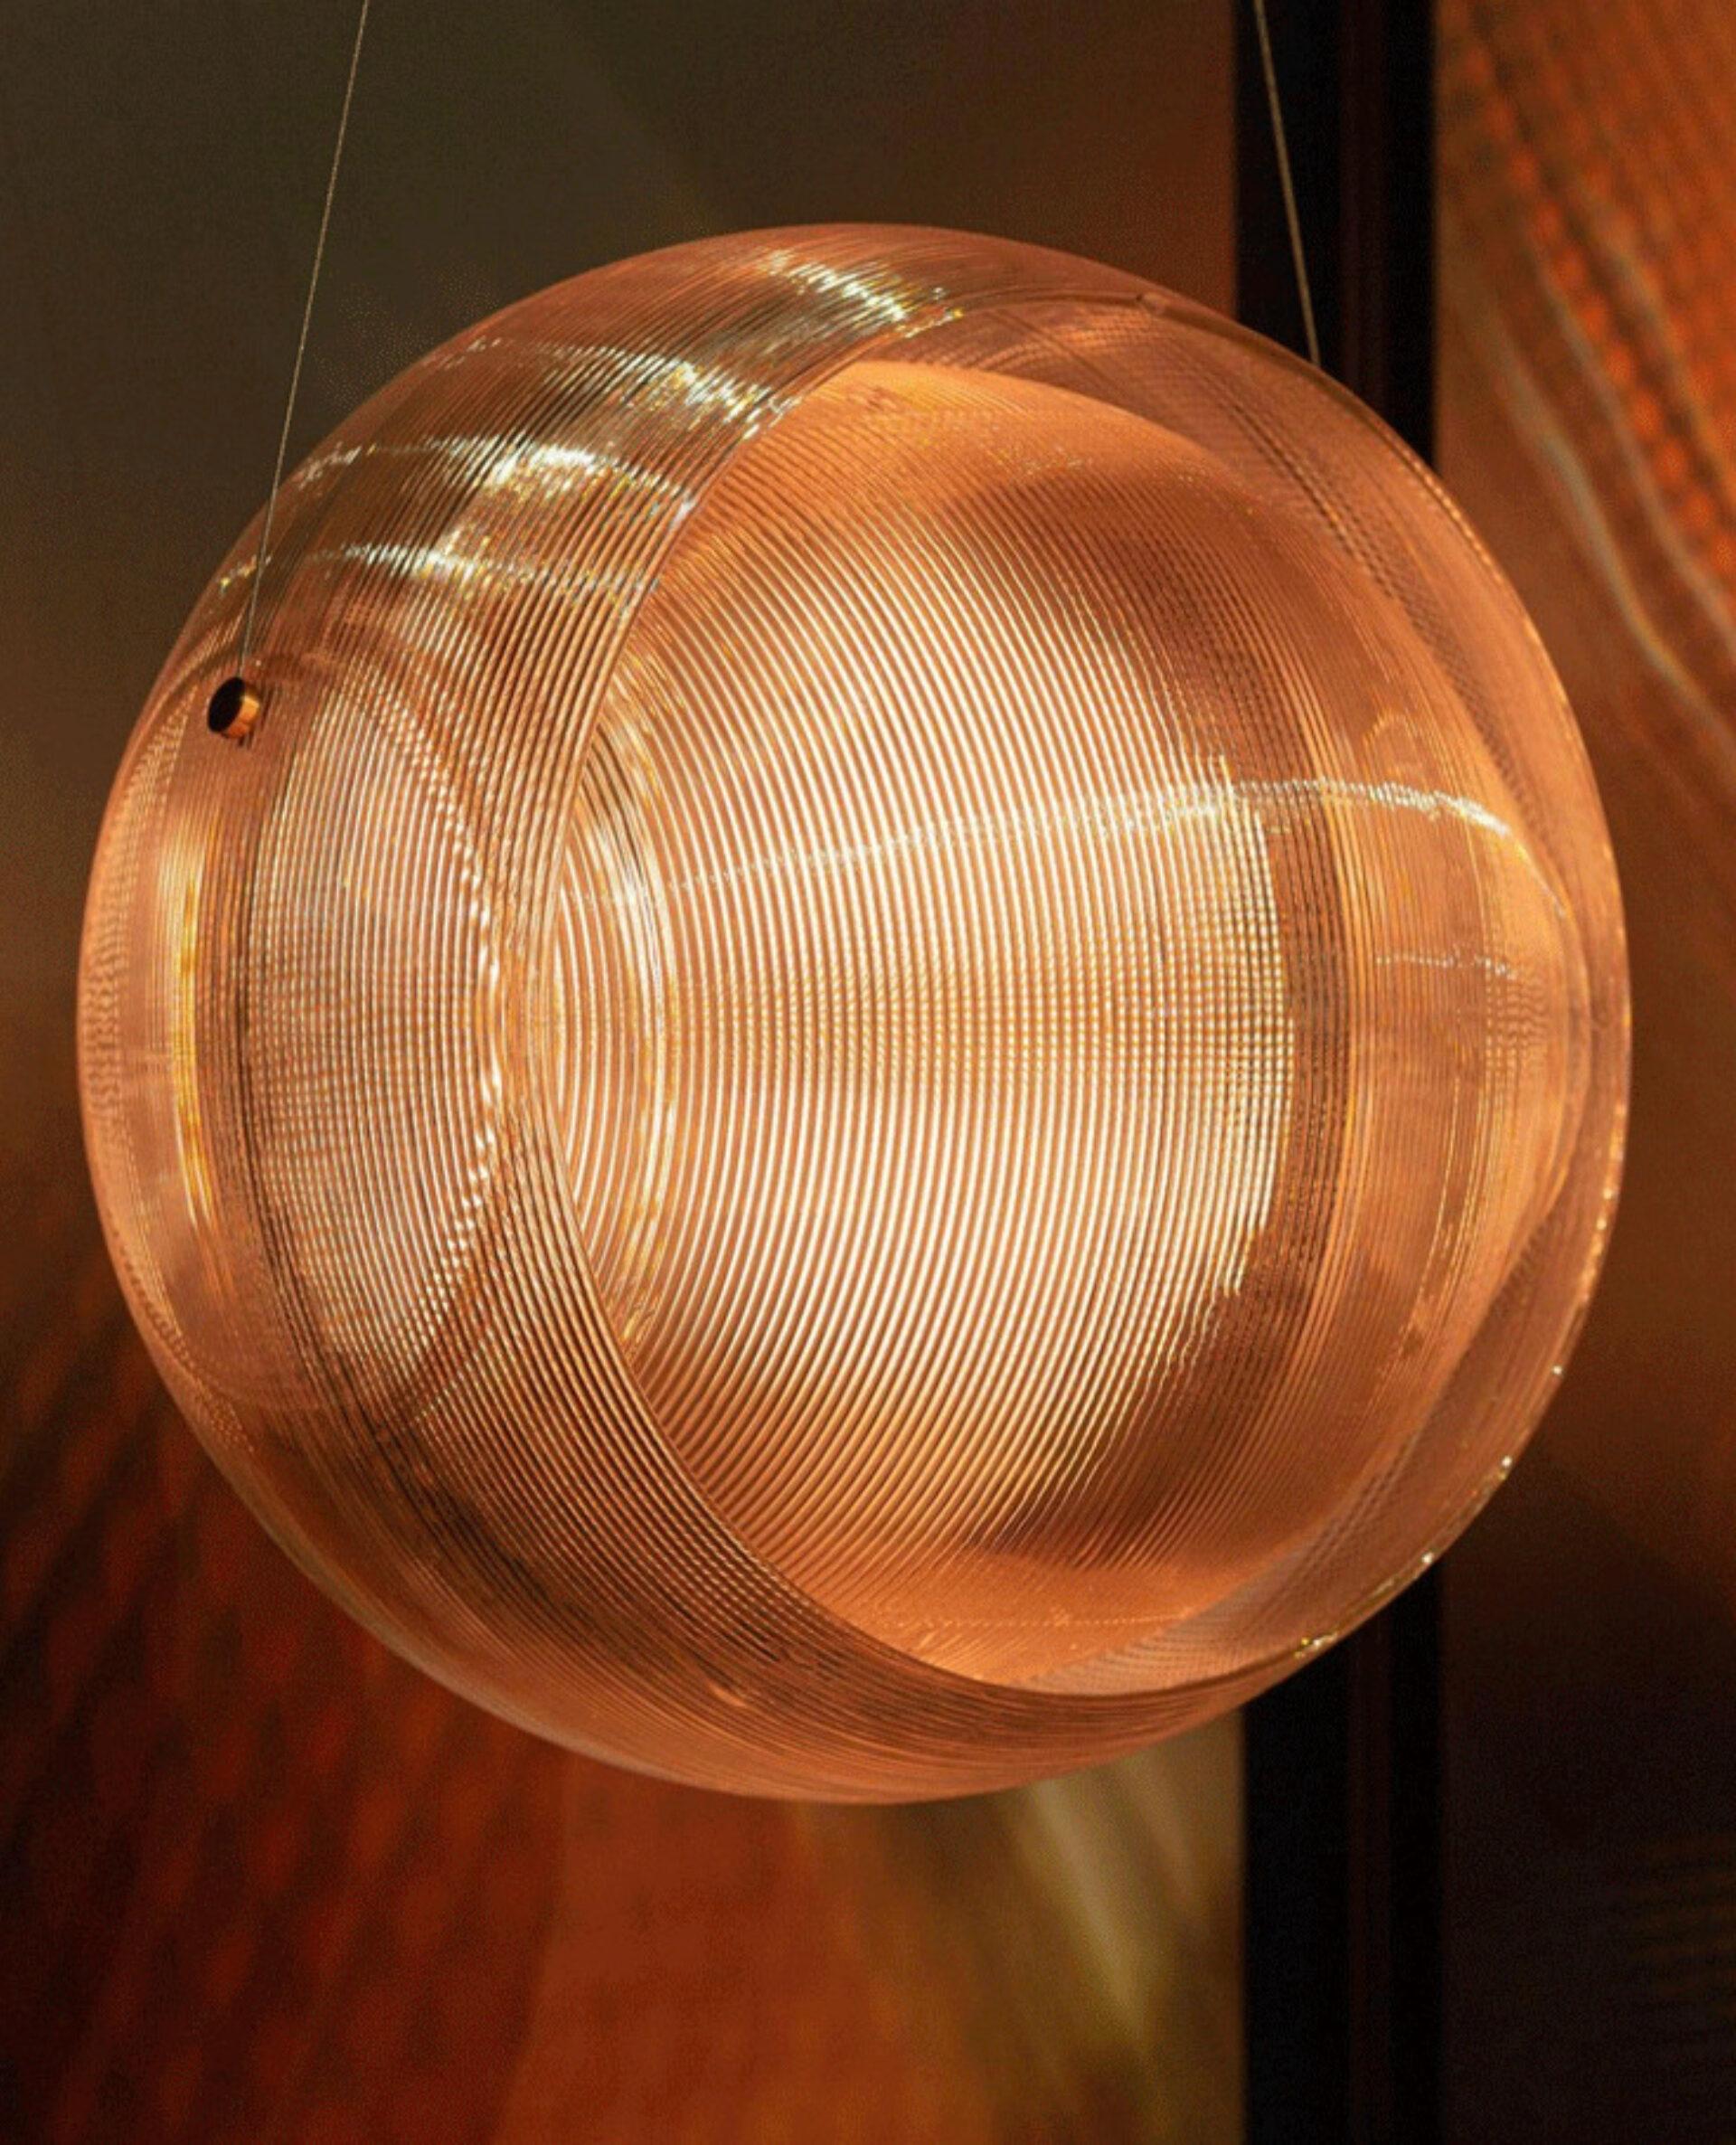 The Helm lamp designed by Kooij is a belted sphere grown additively from syrupy ribbons of molten, recycled plastic.
When passing through the corrugated structure, light breaks, softens and multiplies into an engulfing spread.